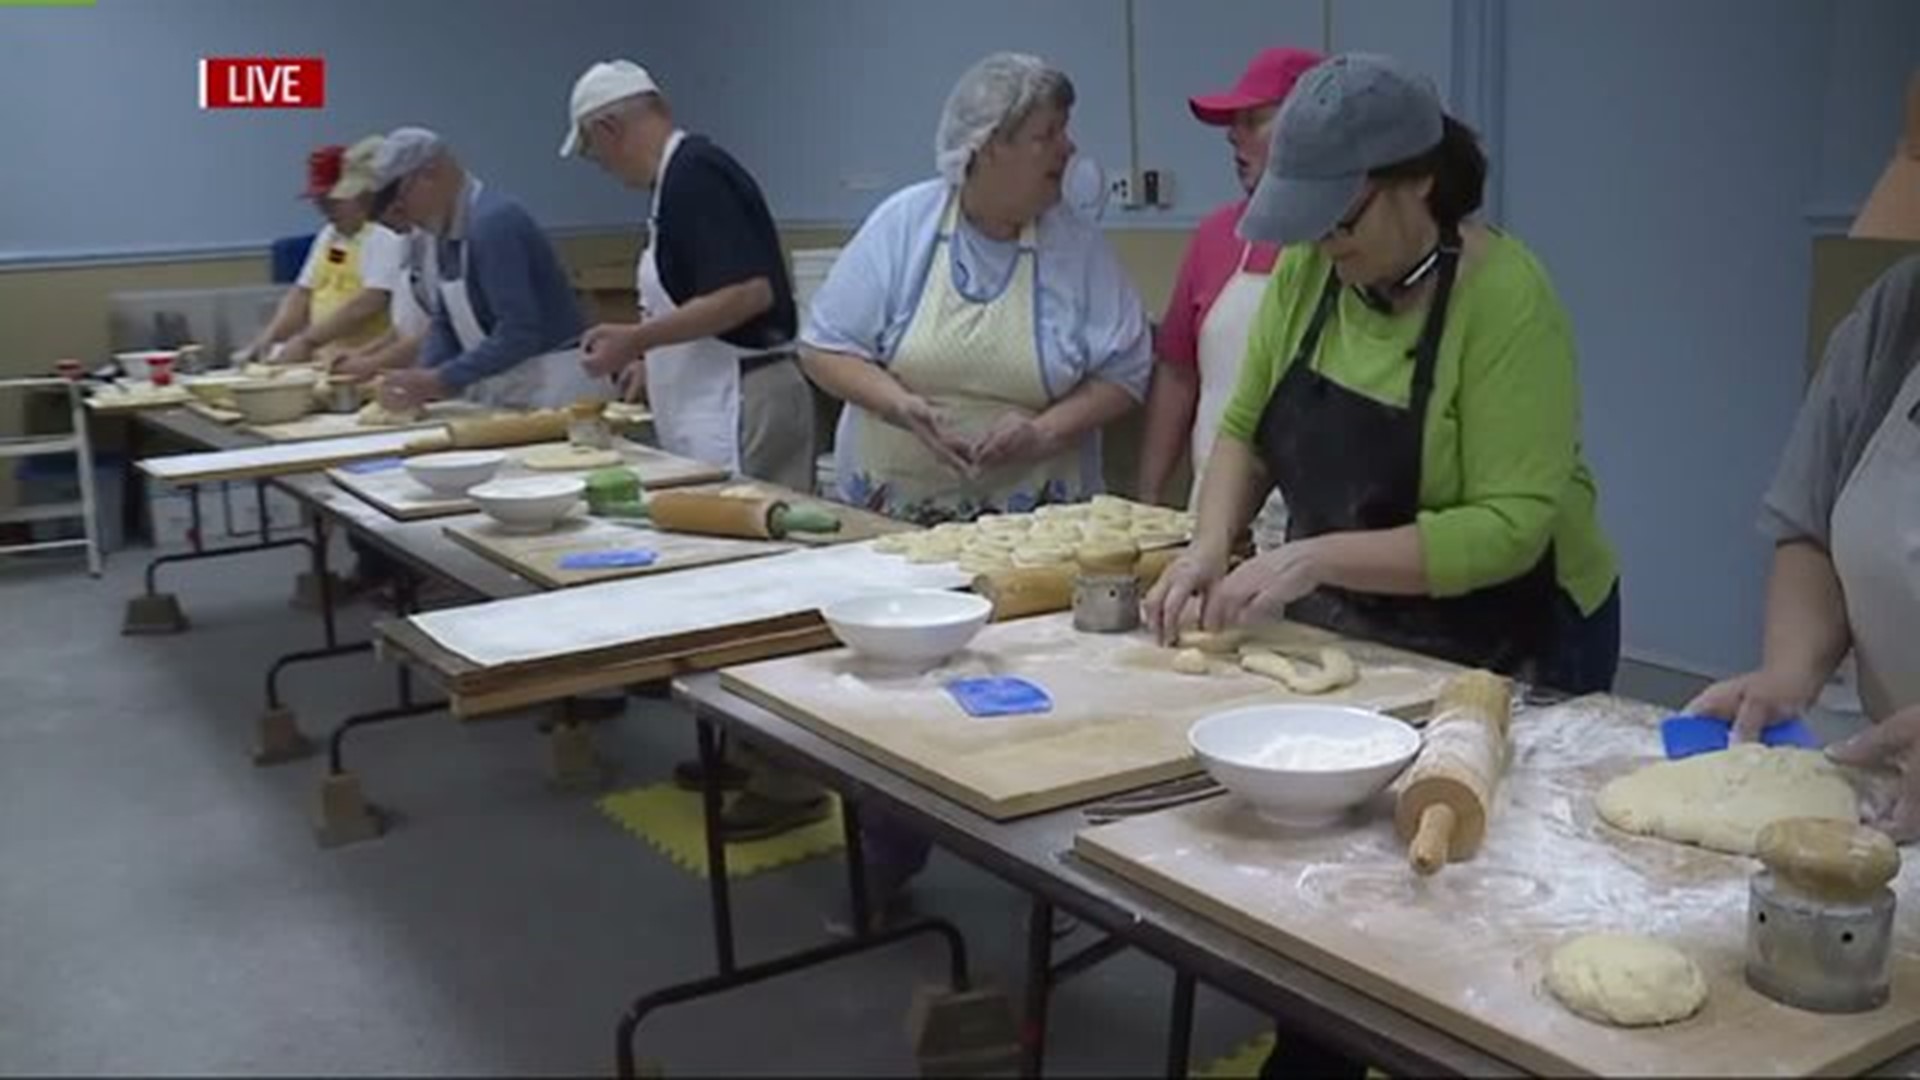 The Holy Trinity Roman Catholic Church in Columbia is busy making fastnachts for Fastnacht Day